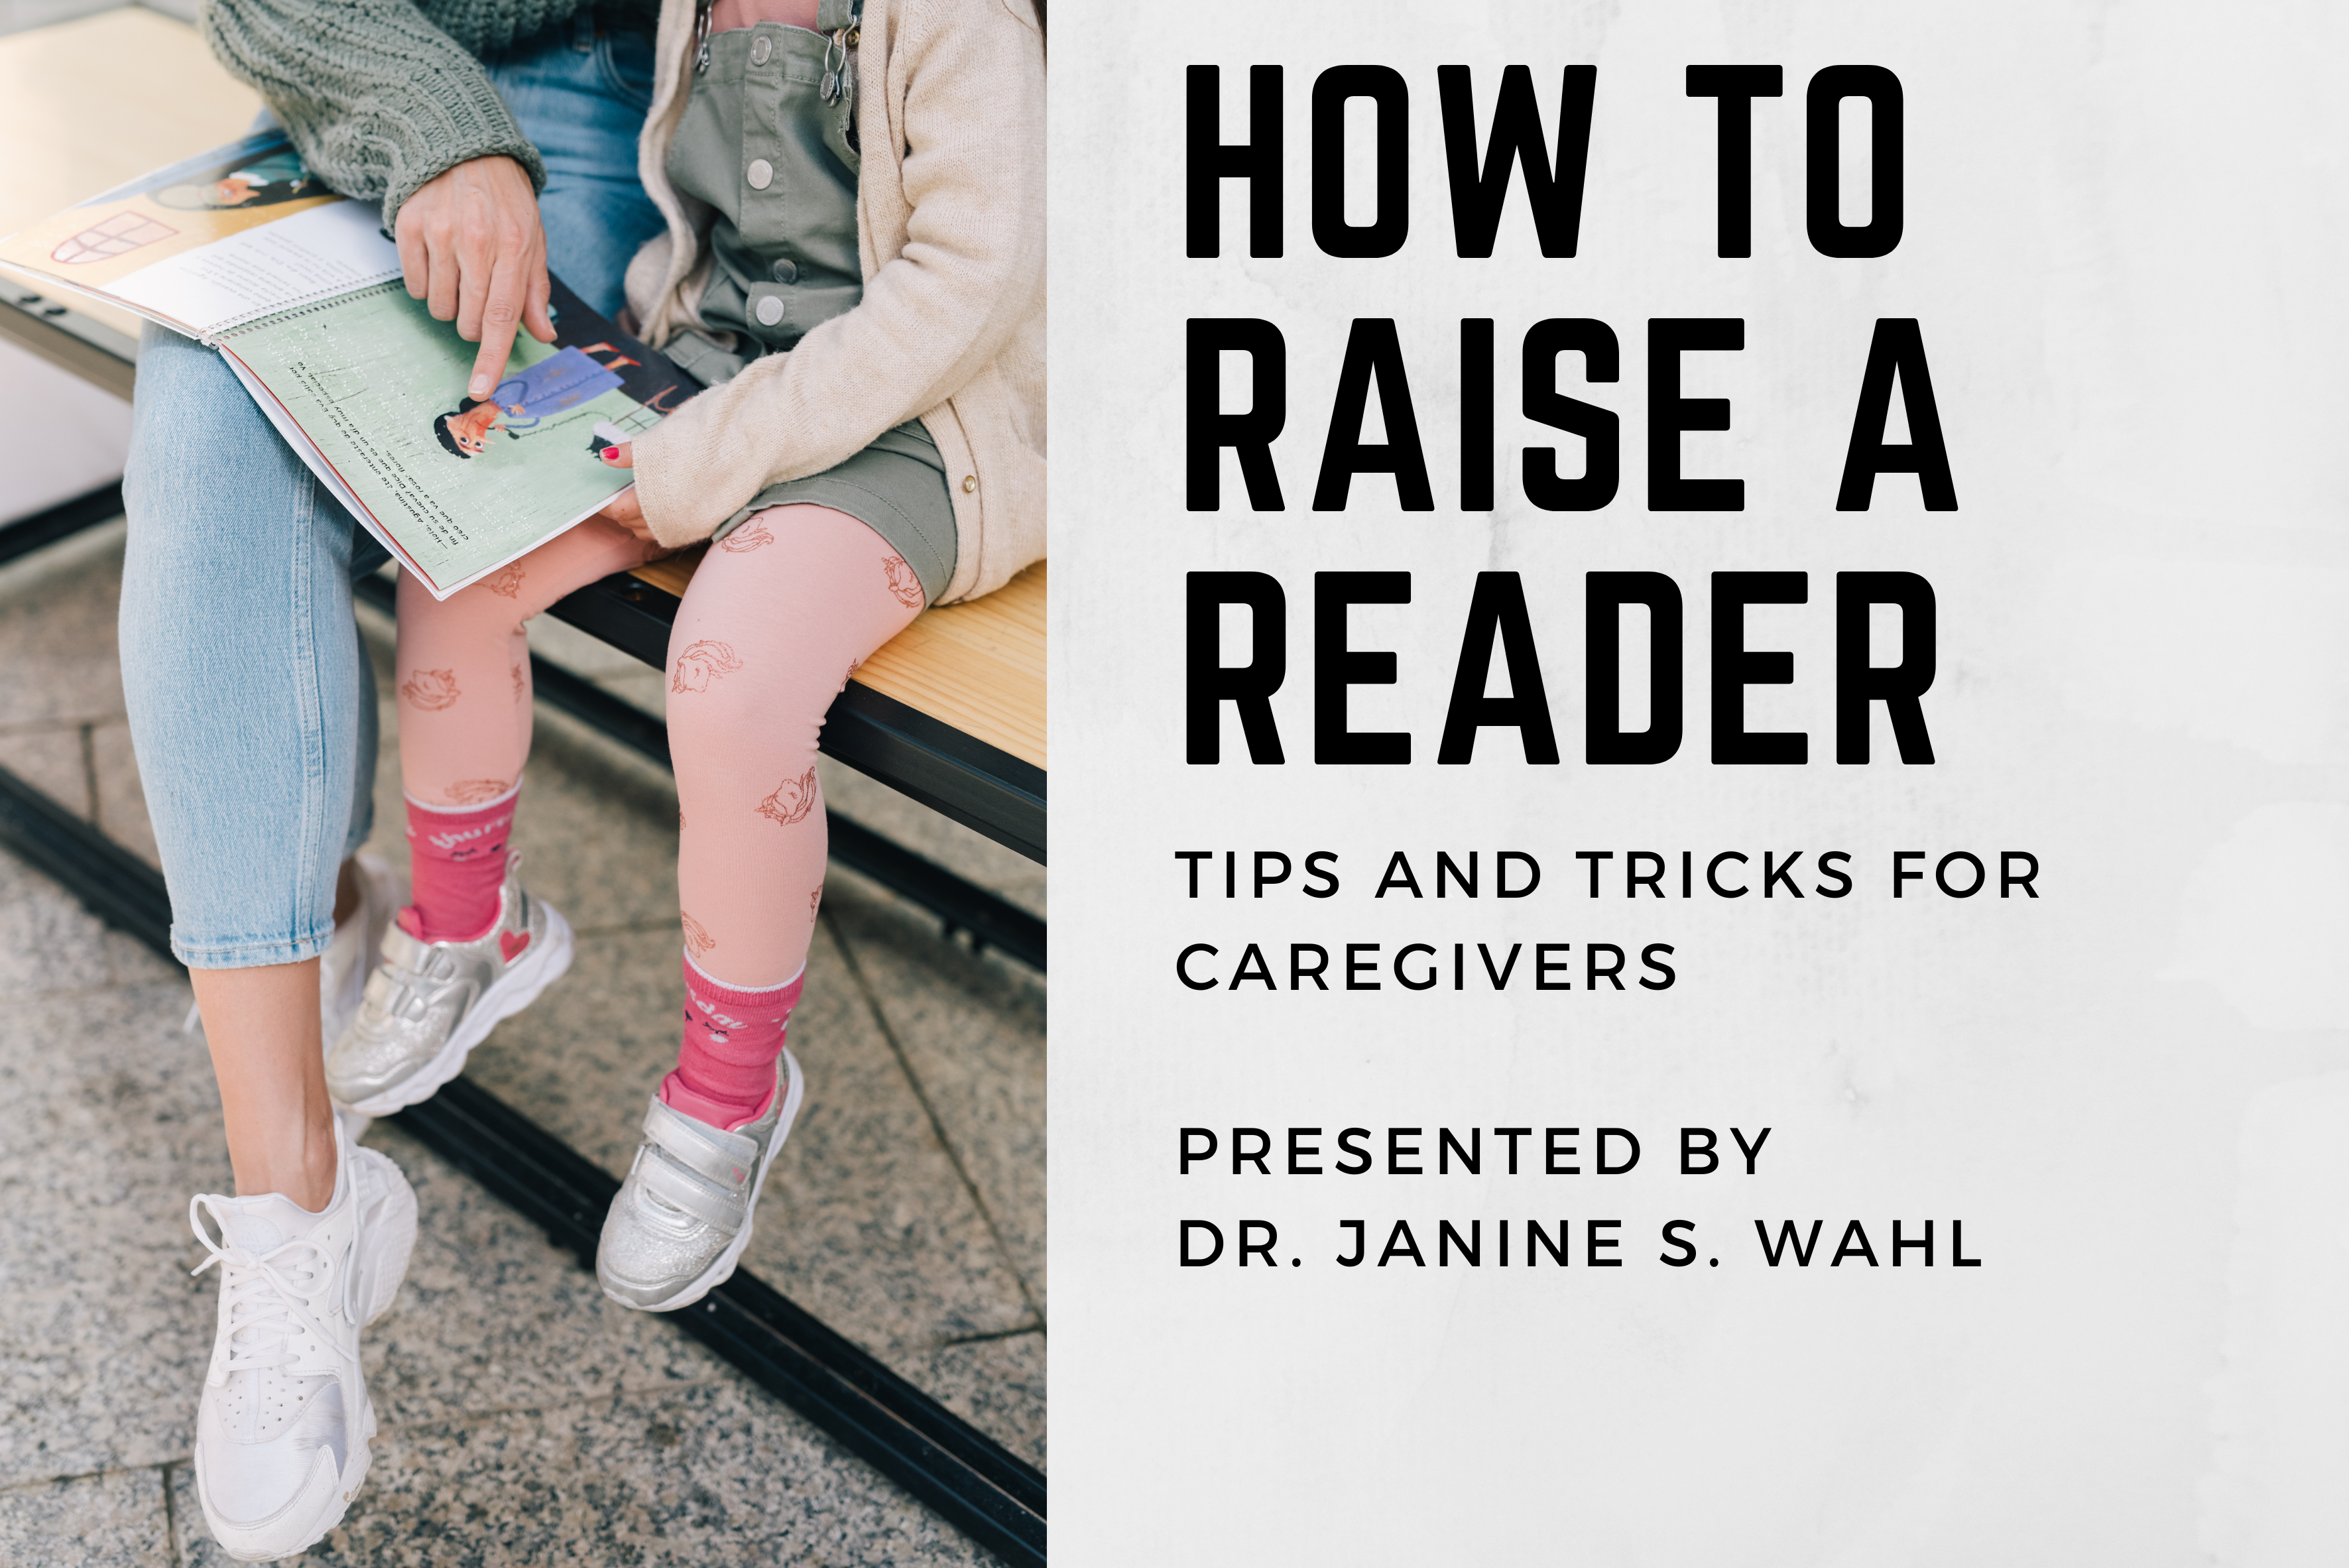 A picture of an adult and child reading together. The text says "How to raise a reader. Tips and tricks for caregivers presented by Dr. Janine S. Wahl